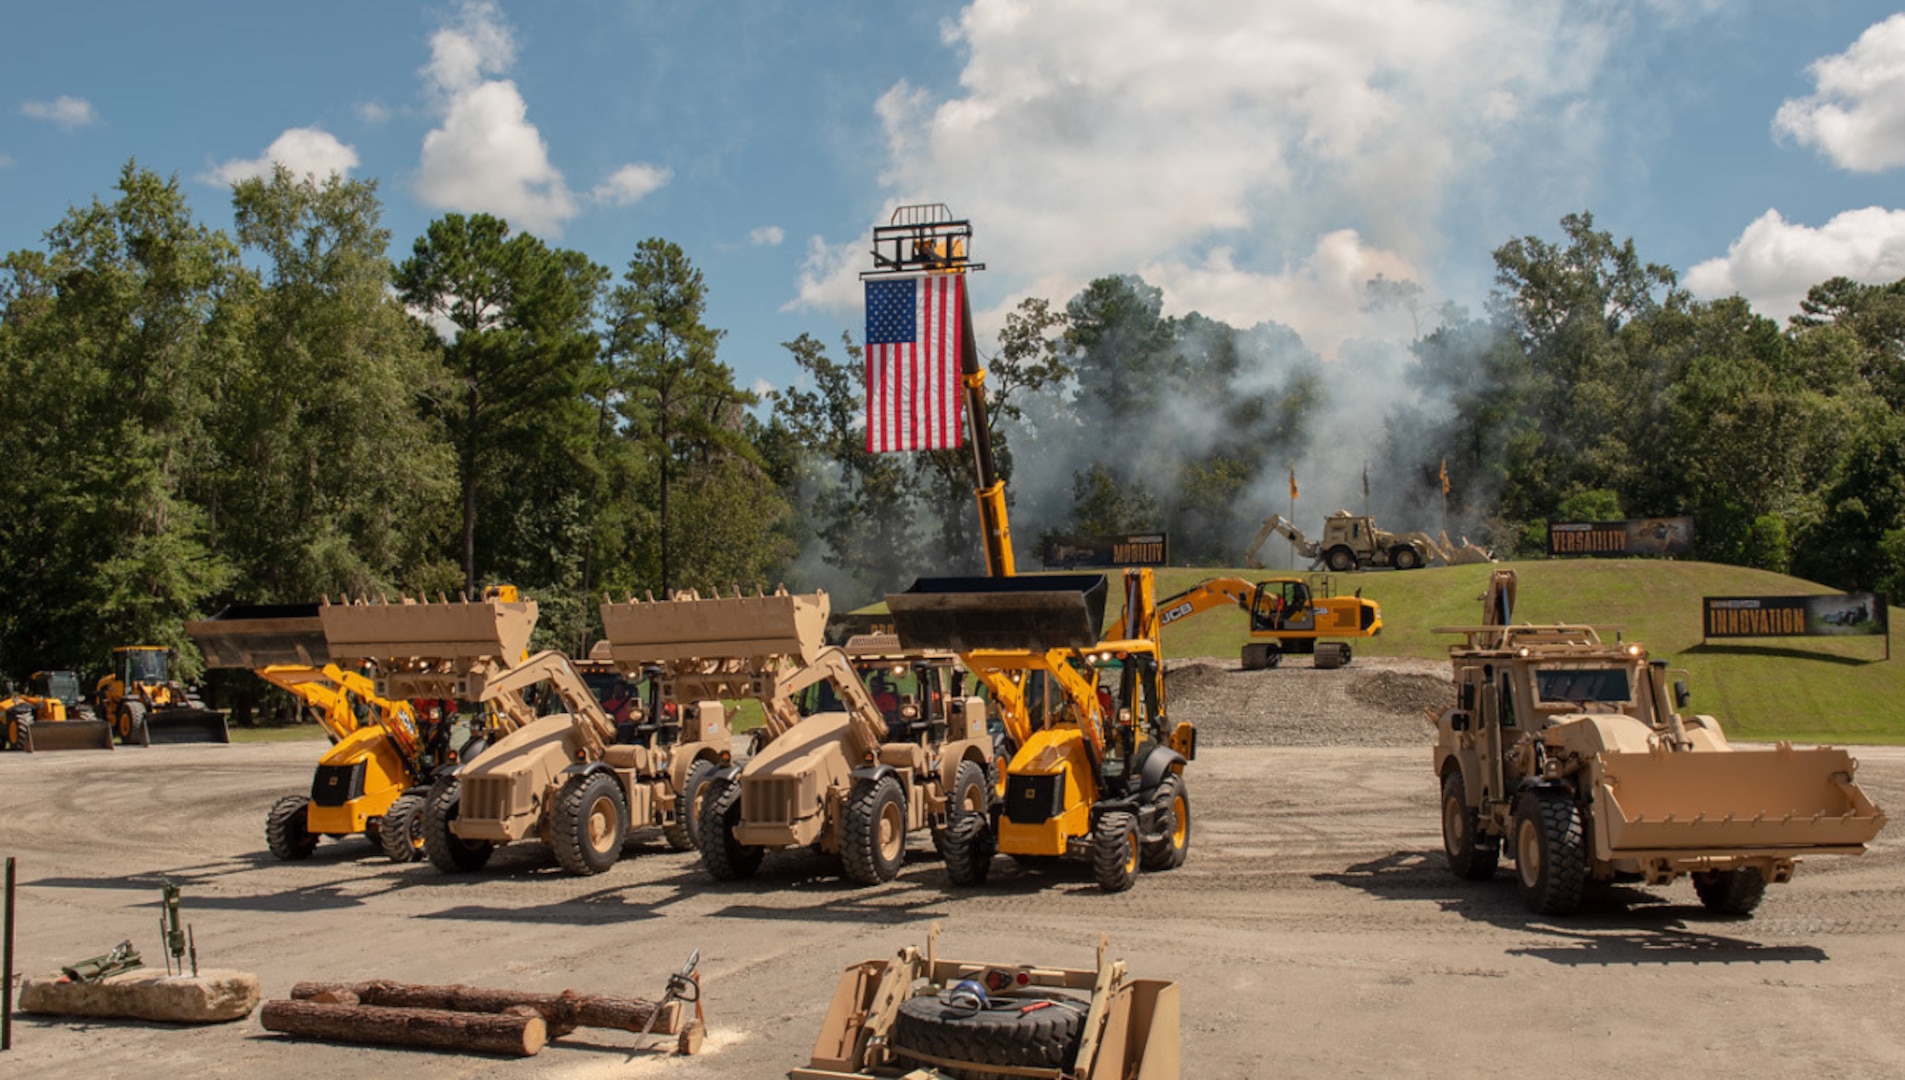 Outside photo of the American flag and multiple excavators